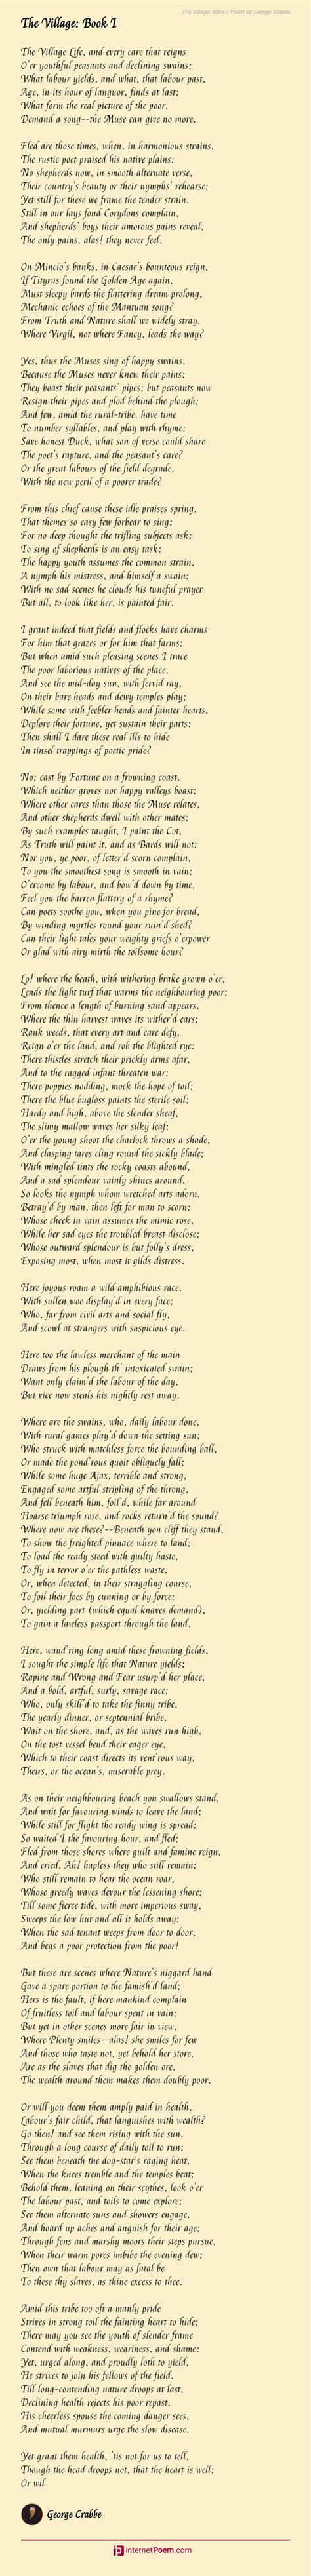 The Village Book I Poem By George Crabbe